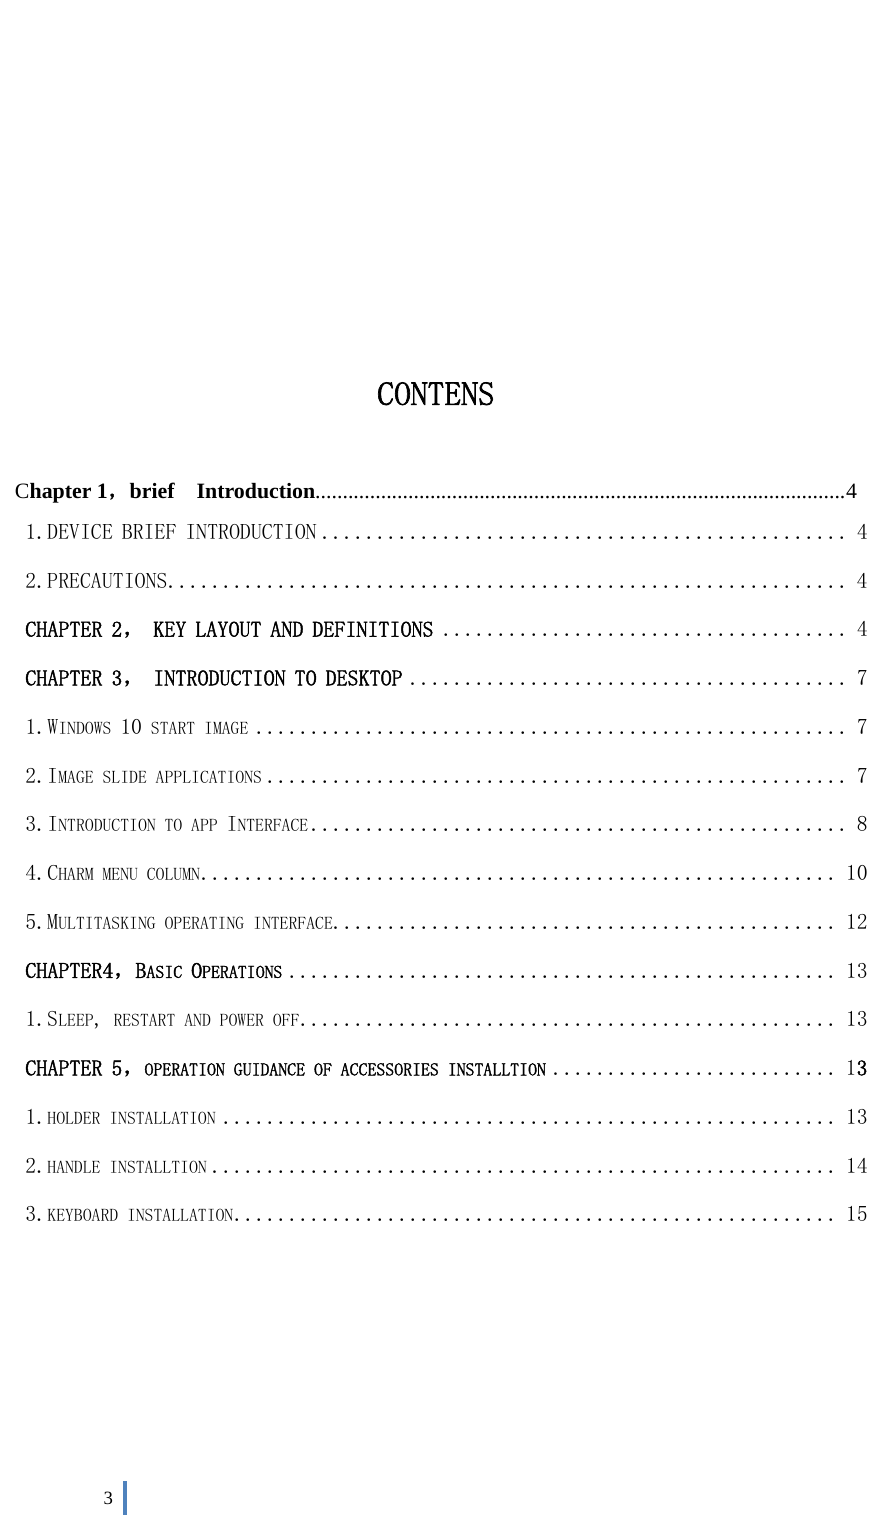  3         CONTENS  Chapter 1，brief  Introduction................................................................................................. 4 1.DEVICE BRIEF INTRODUCTION ................................................ 4 2.PRECAUTIONS .............................................................. 4 CHAPTER 2， KEY LAYOUT AND DEFINITIONS ..................................... 4 CHAPTER 3， INTRODUCTION TO DESKTOP ........................................ 7 1.WINDOWS 10 START IMAGE ...................................................... 7 2.IMAGE SLIDE APPLICATIONS ..................................................... 7 3.INTRODUCTION TO APP INTERFACE ................................................. 8 4.CHARM MENU COLUMN .......................................................... 10 5.MULTITASKING OPERATING INTERFACE .............................................. 12 CHAPTER4，BASIC OPERATIONS .................................................. 13 1.SLEEP, RESTART AND POWER OFF ................................................. 13 CHAPTER 5，OPERATION GUIDANCE OF ACCESSORIES INSTALLTION .......................... 13 1.HOLDER INSTALLATION ........................................................ 13 2.HANDLE INSTALLTION ......................................................... 14 3.KEYBOARD INSTALLATION ....................................................... 15        